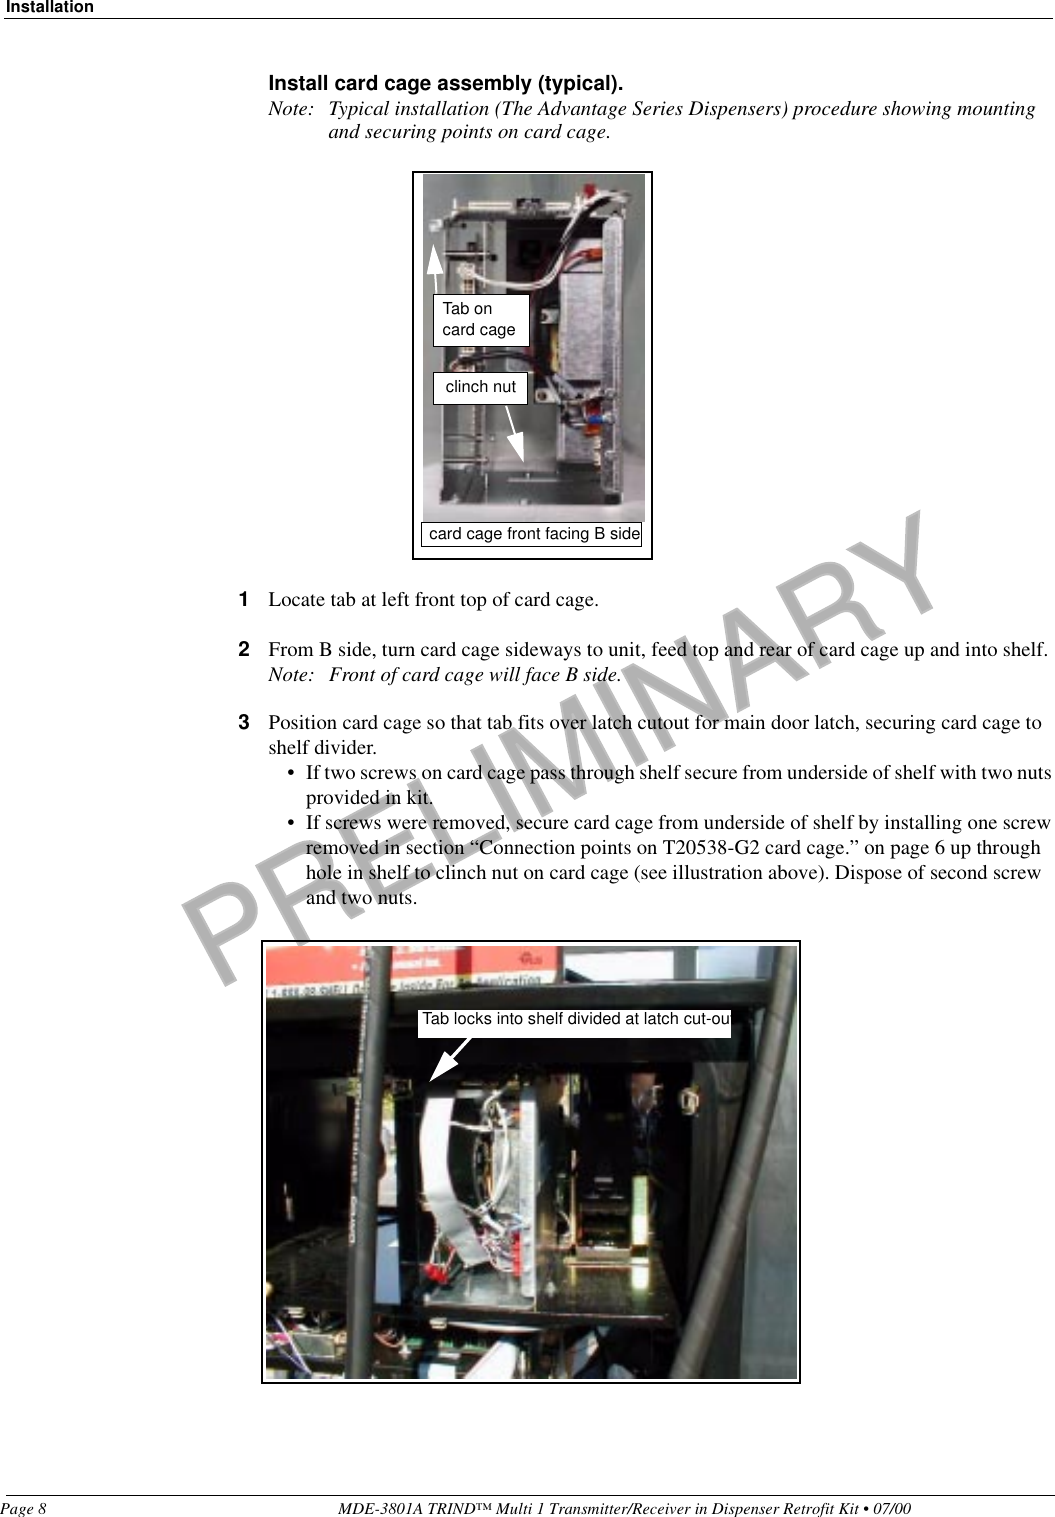 PRELIMINARYInstallationPage 8 MDE-3801A TRIND™ Multi 1 Transmitter/Receiver in Dispenser Retrofit Kit • 07/00Install card cage assembly (typical).Note: Typical installation (The Advantage Series Dispensers) procedure showing mounting and securing points on card cage.                                                                                                                                                                                                                                                                                                                                                                                                                                                                                                                                                                                                                                                                                                                                                                                                                                                                                                                                                                                                                                                                                              1Locate tab at left front top of card cage.2From B side, turn card cage sideways to unit, feed top and rear of card cage up and into shelf.Note: Front of card cage will face B side.3Position card cage so that tab fits over latch cutout for main door latch, securing card cage to shelf divider. • If two screws on card cage pass through shelf secure from underside of shelf with two nuts provided in kit.• If screws were removed, secure card cage from underside of shelf by installing one screw removed in section “Connection points on T20538-G2 card cage.” on page 6 up through hole in shelf to clinch nut on card cage (see illustration above). Dispose of second screw and two nuts.Tab on card cagecard cage front facing B sideclinch nutTab locks into shelf divided at latch cut-out